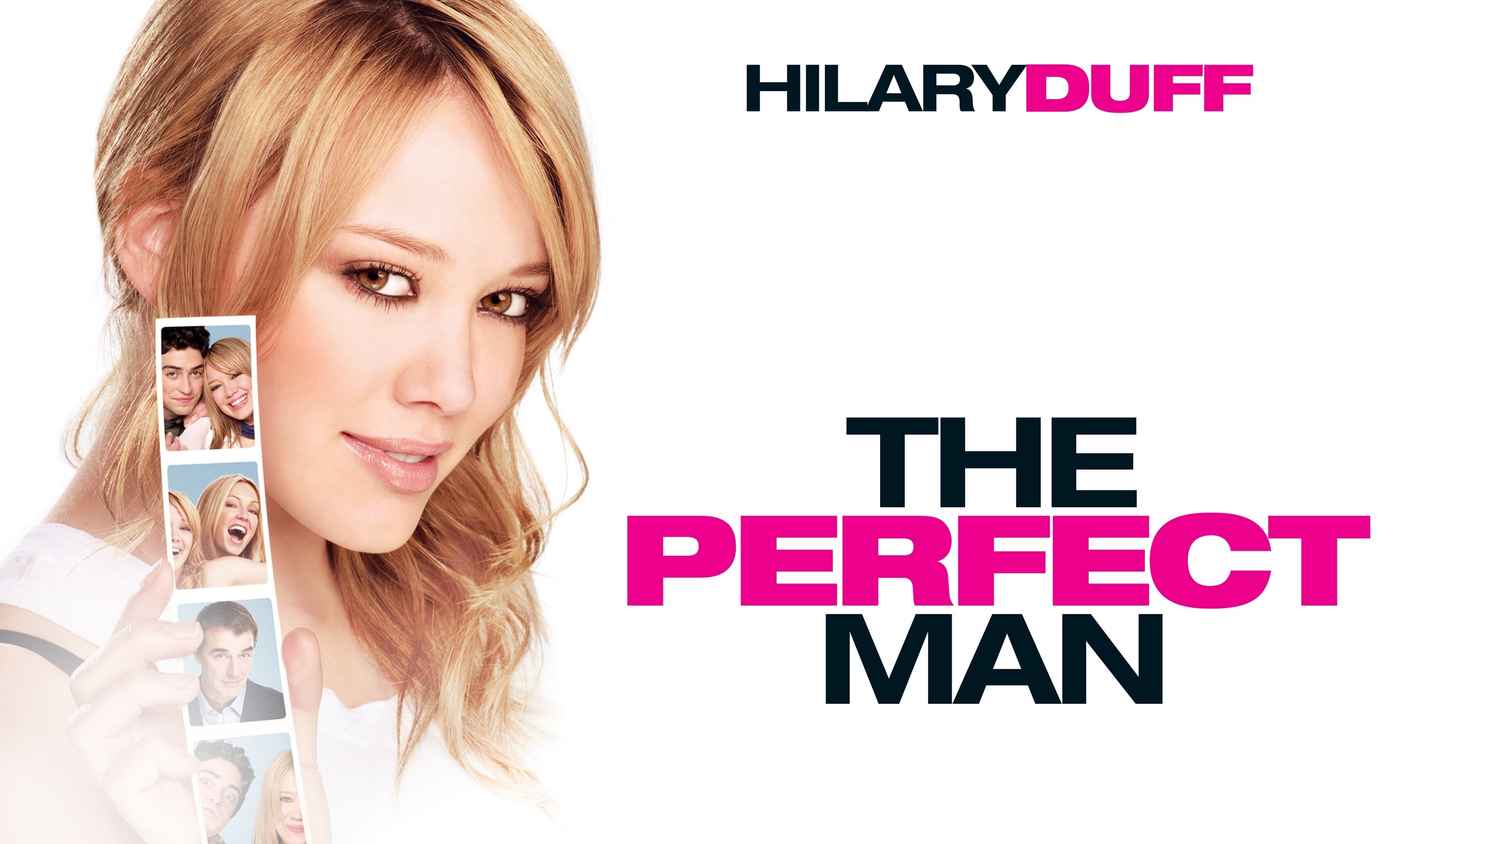 Zhe perfect date watch online